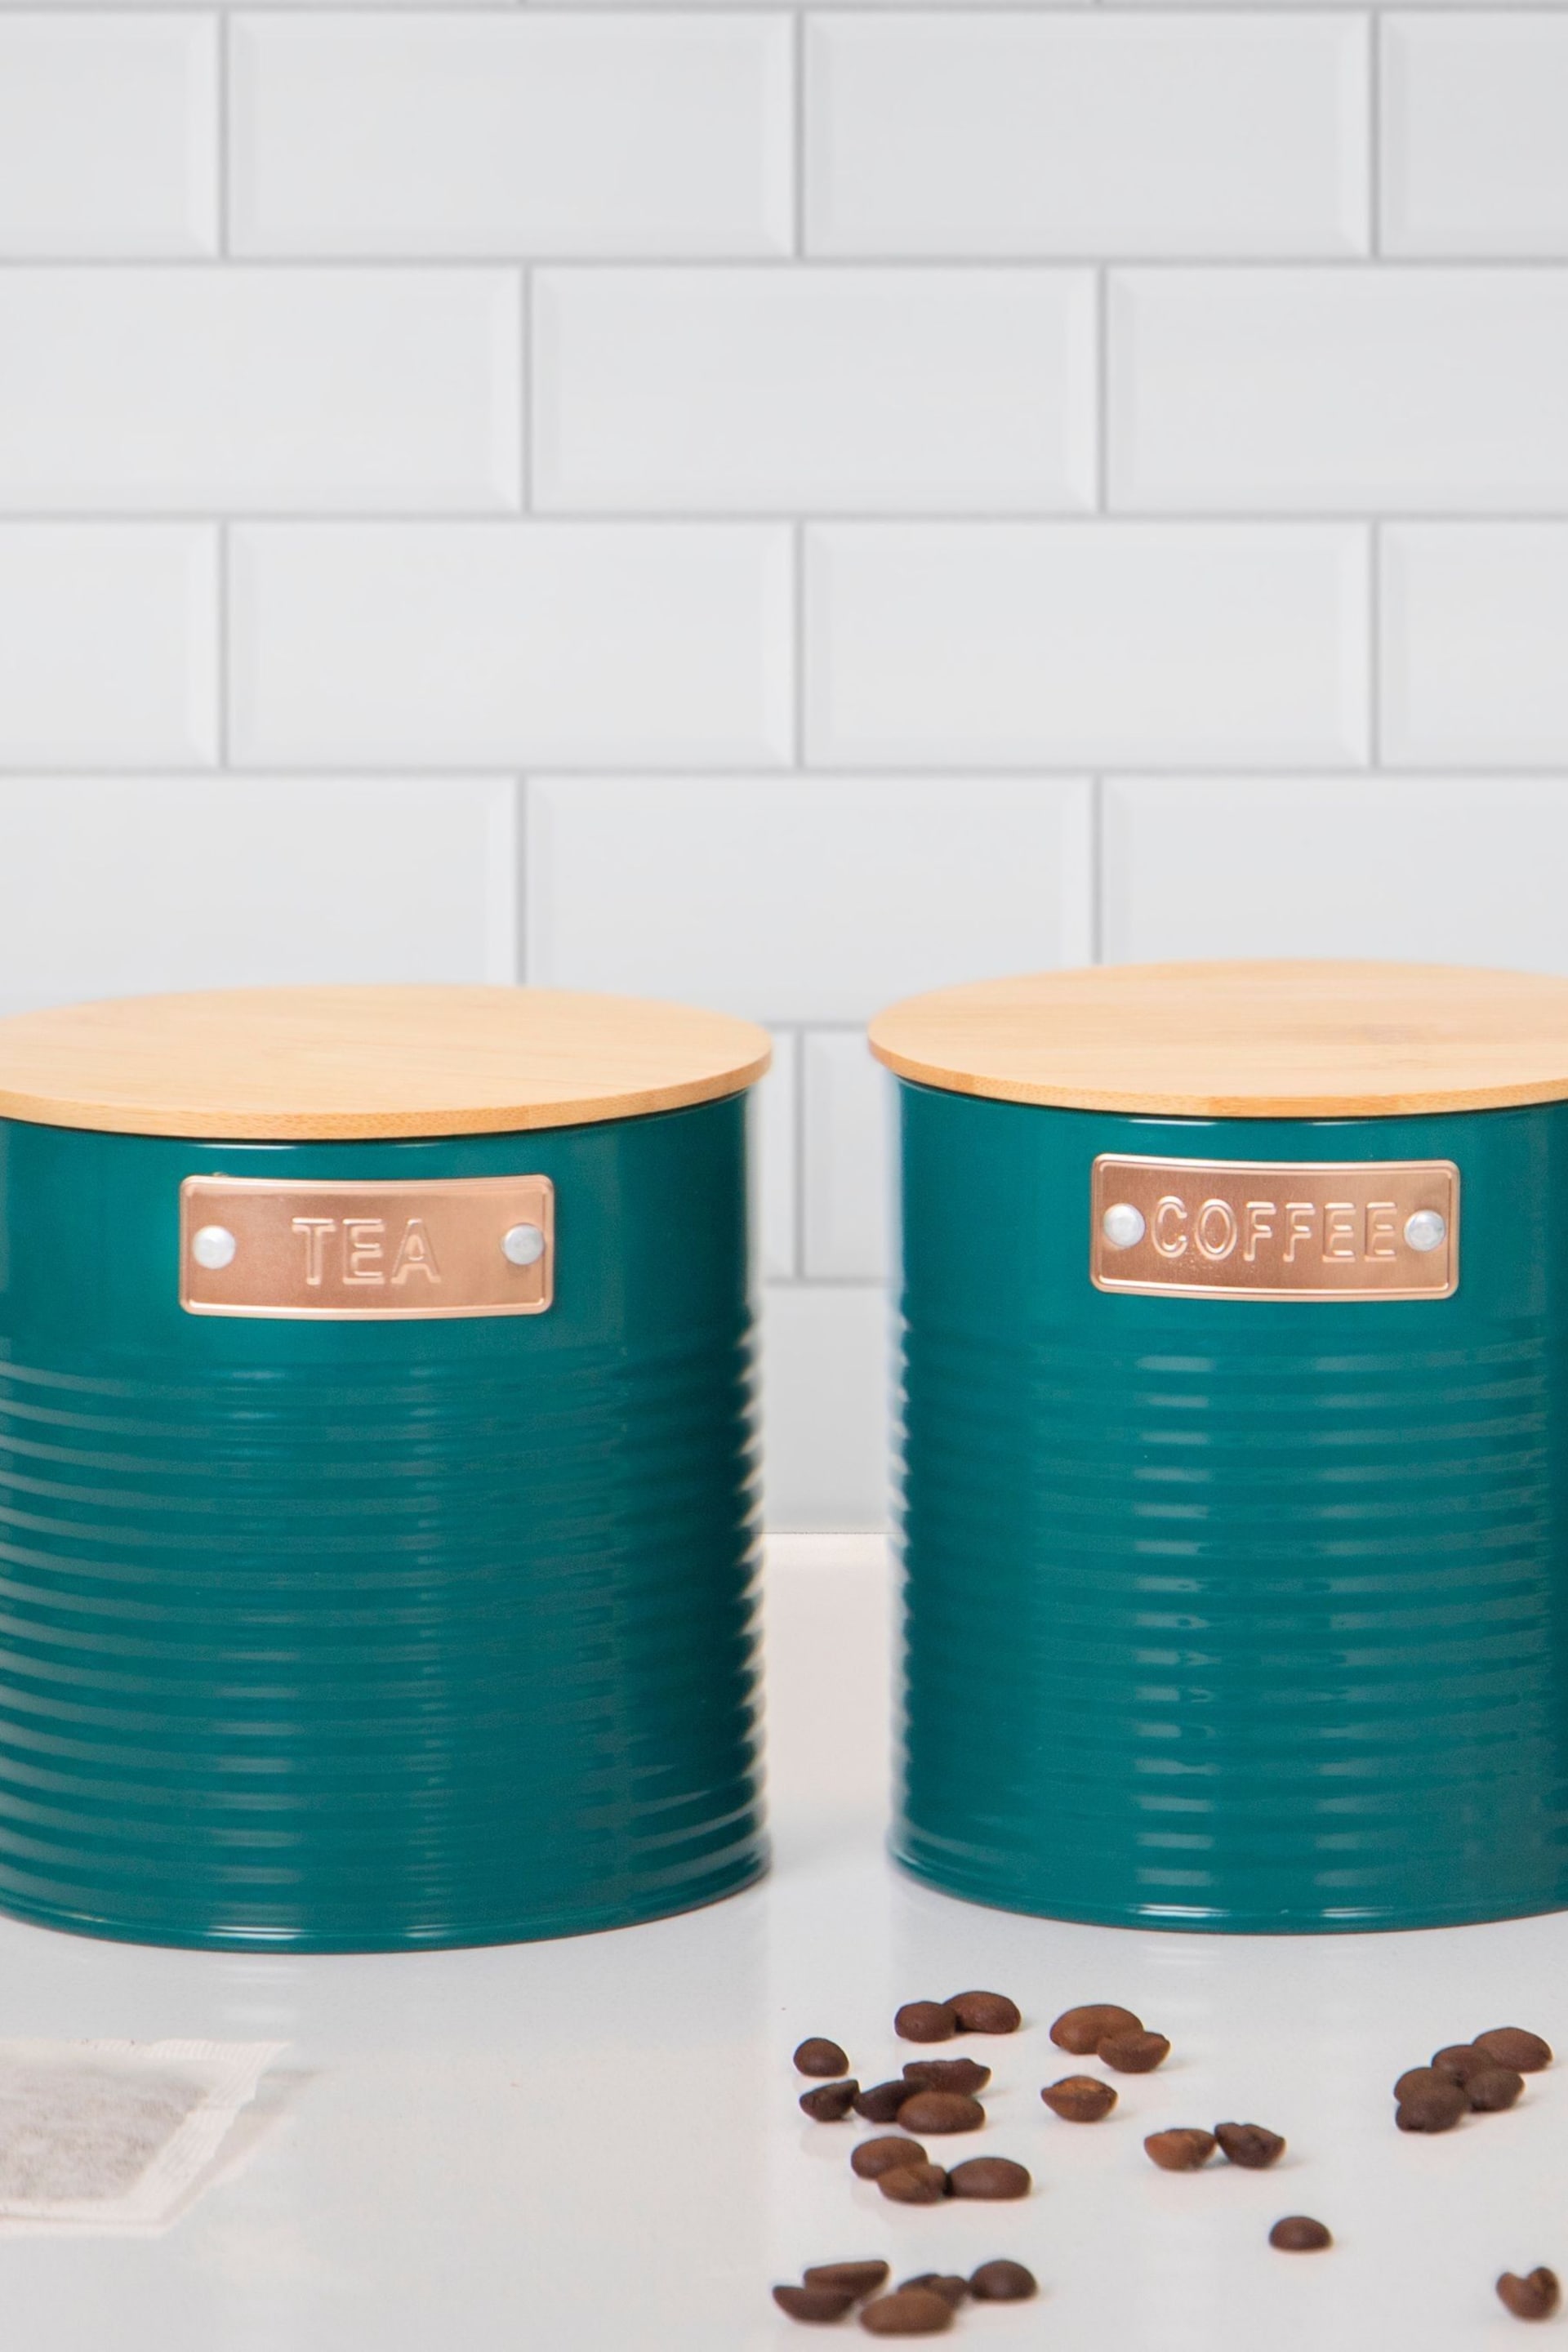 Kitchencraft Teal 3 Pieces Storage Canisters - Image 1 of 5